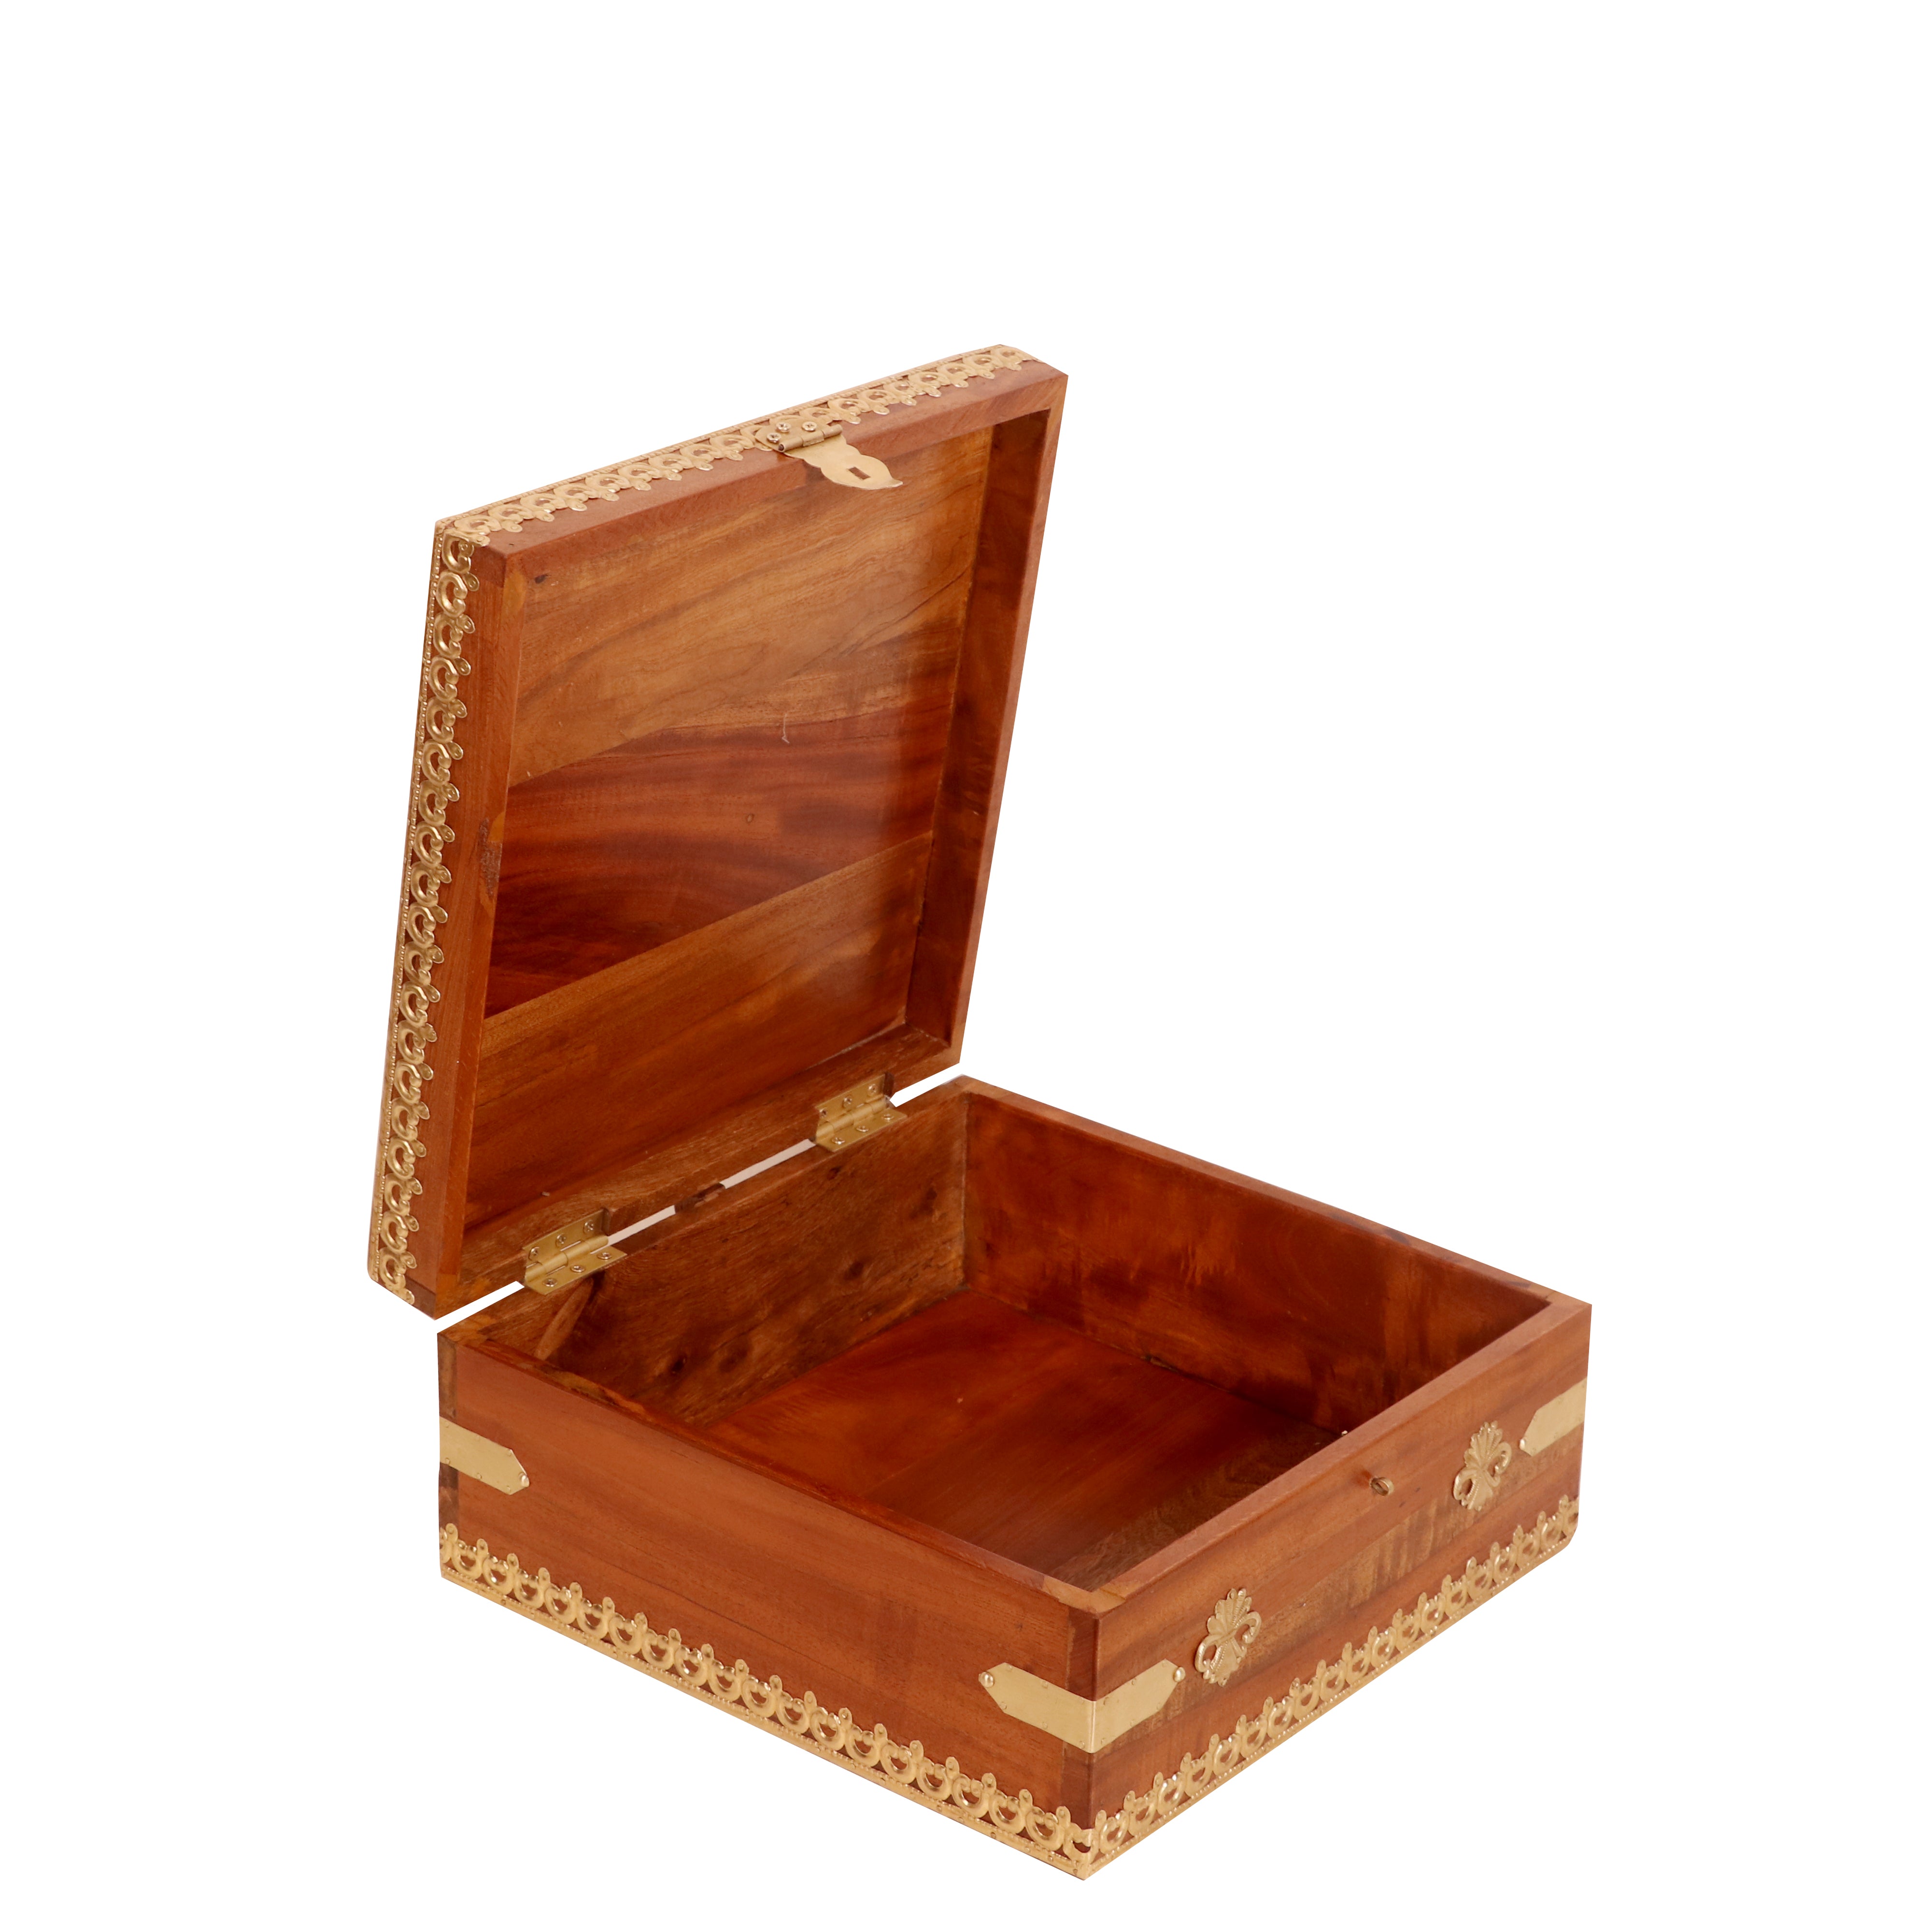 Solid wood Brass Square Box Wooden Box